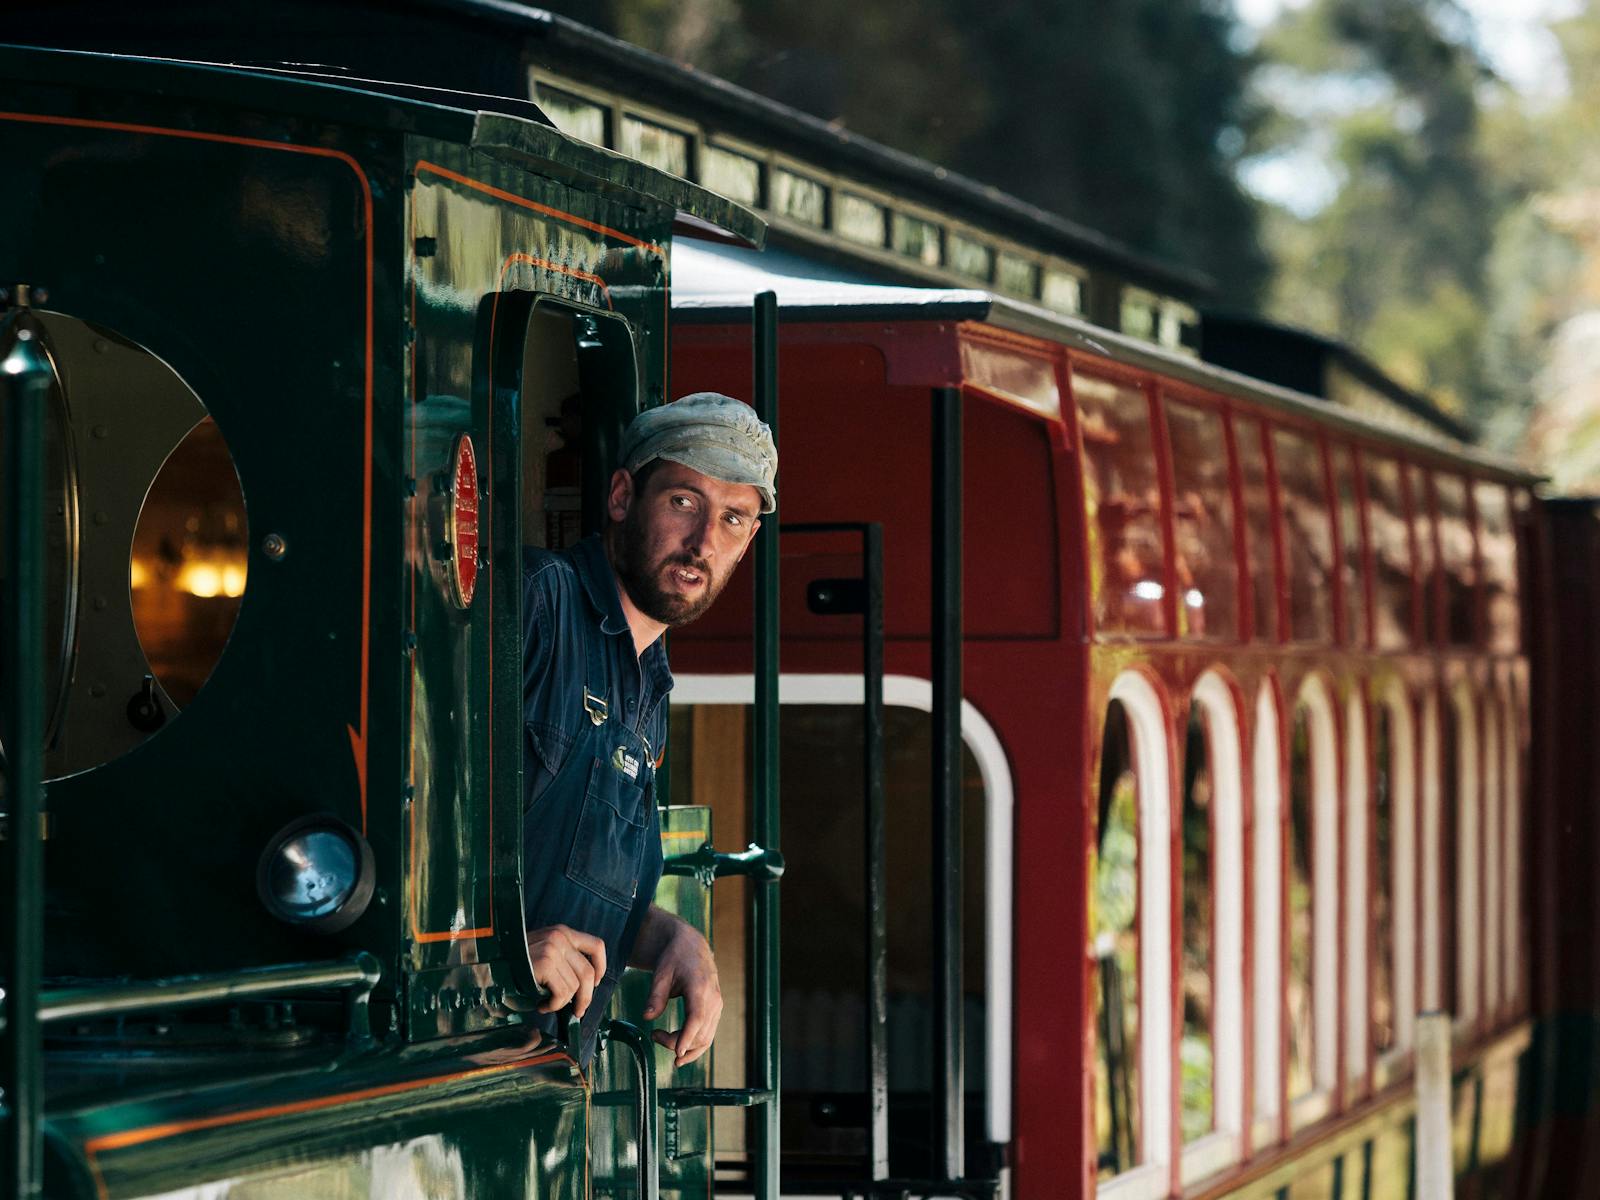 An engineer in charge of a locomotive on the West Coast Wilderness Railway